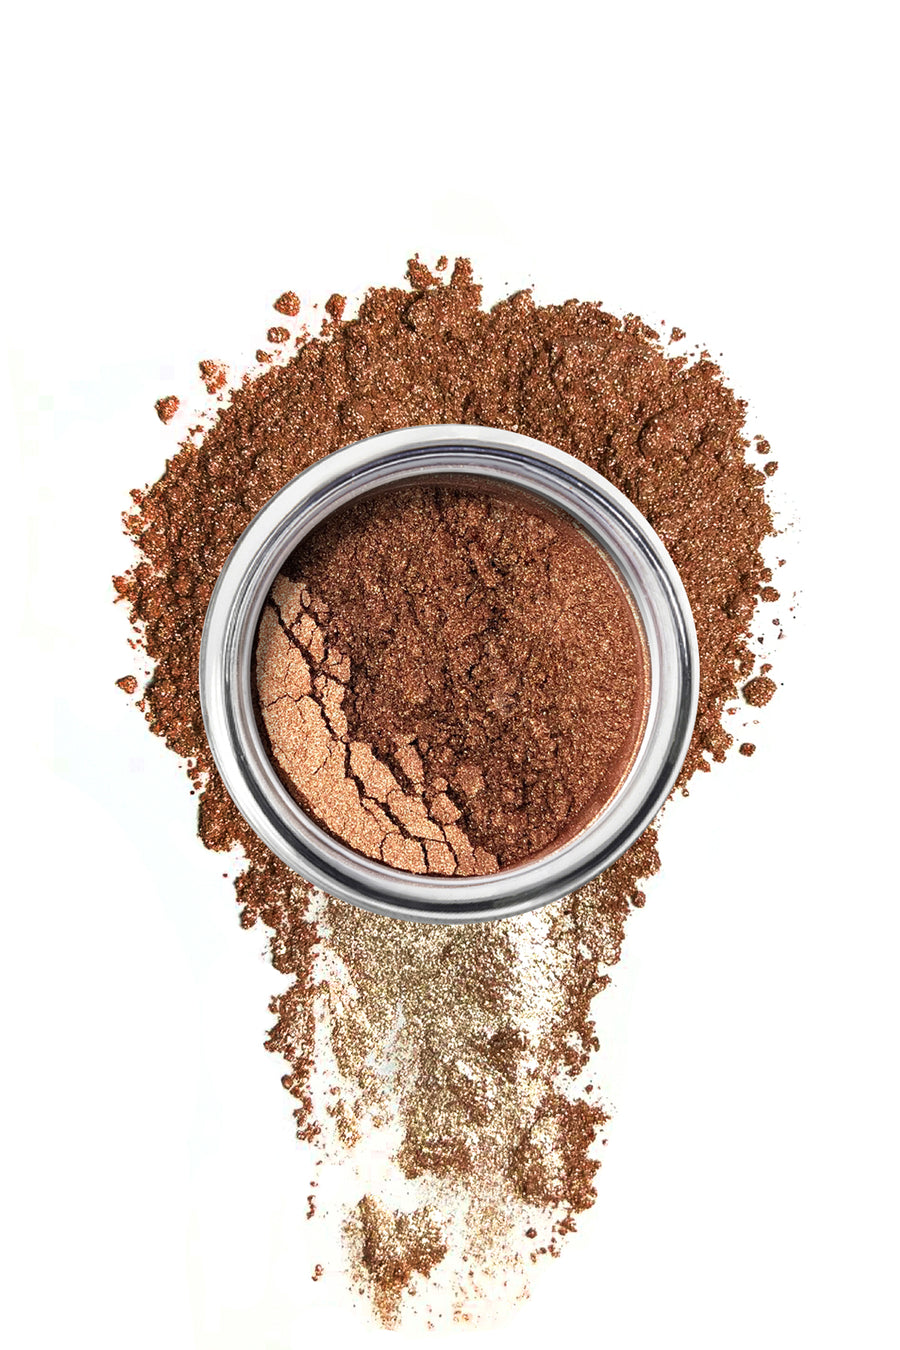 Shimmer Eyeshadow #34 - Taupe Brown - Blend Mineral Cosmetics